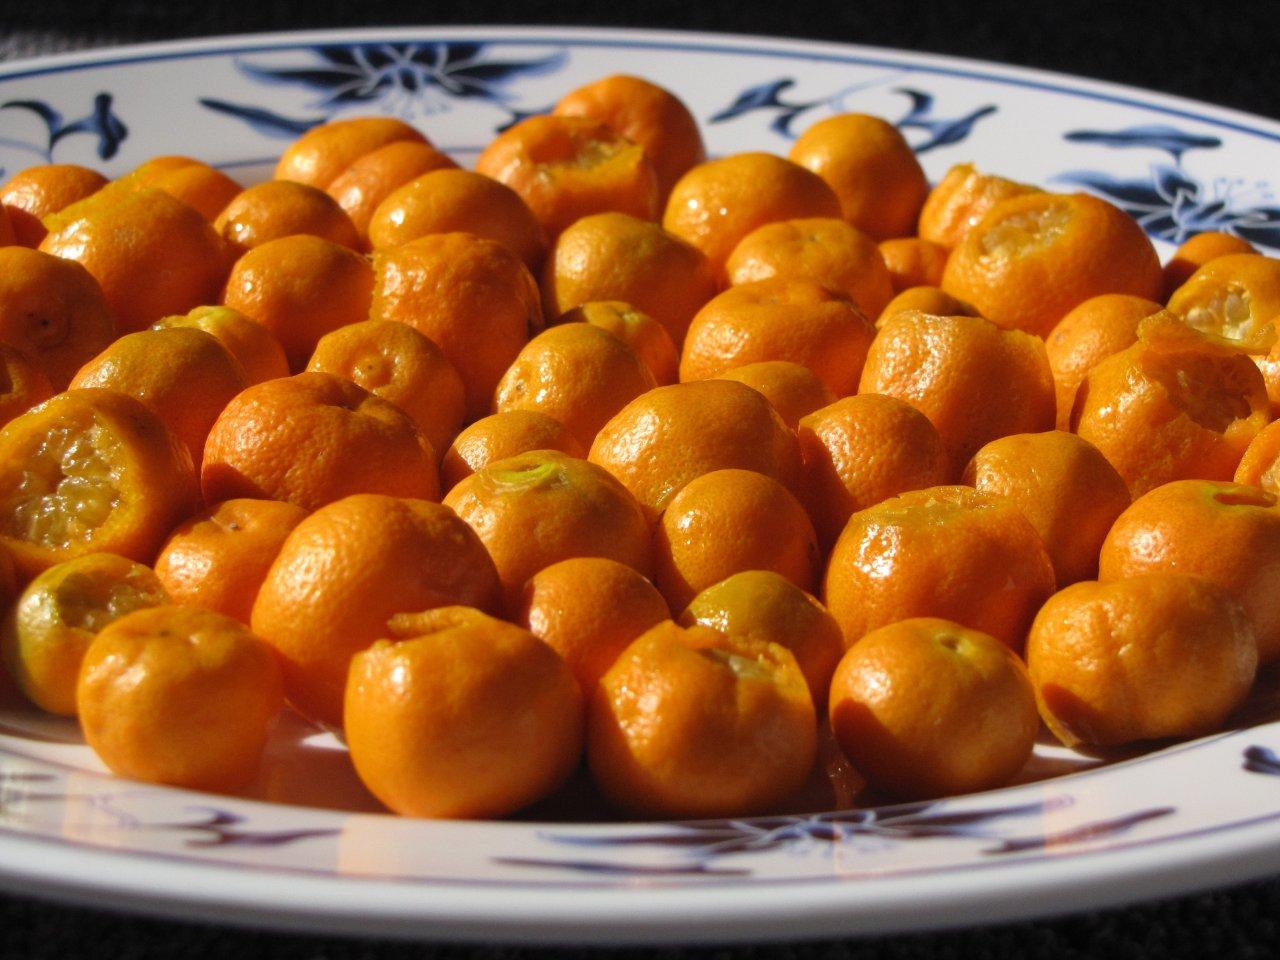 many oranges are on a plate with floral designs